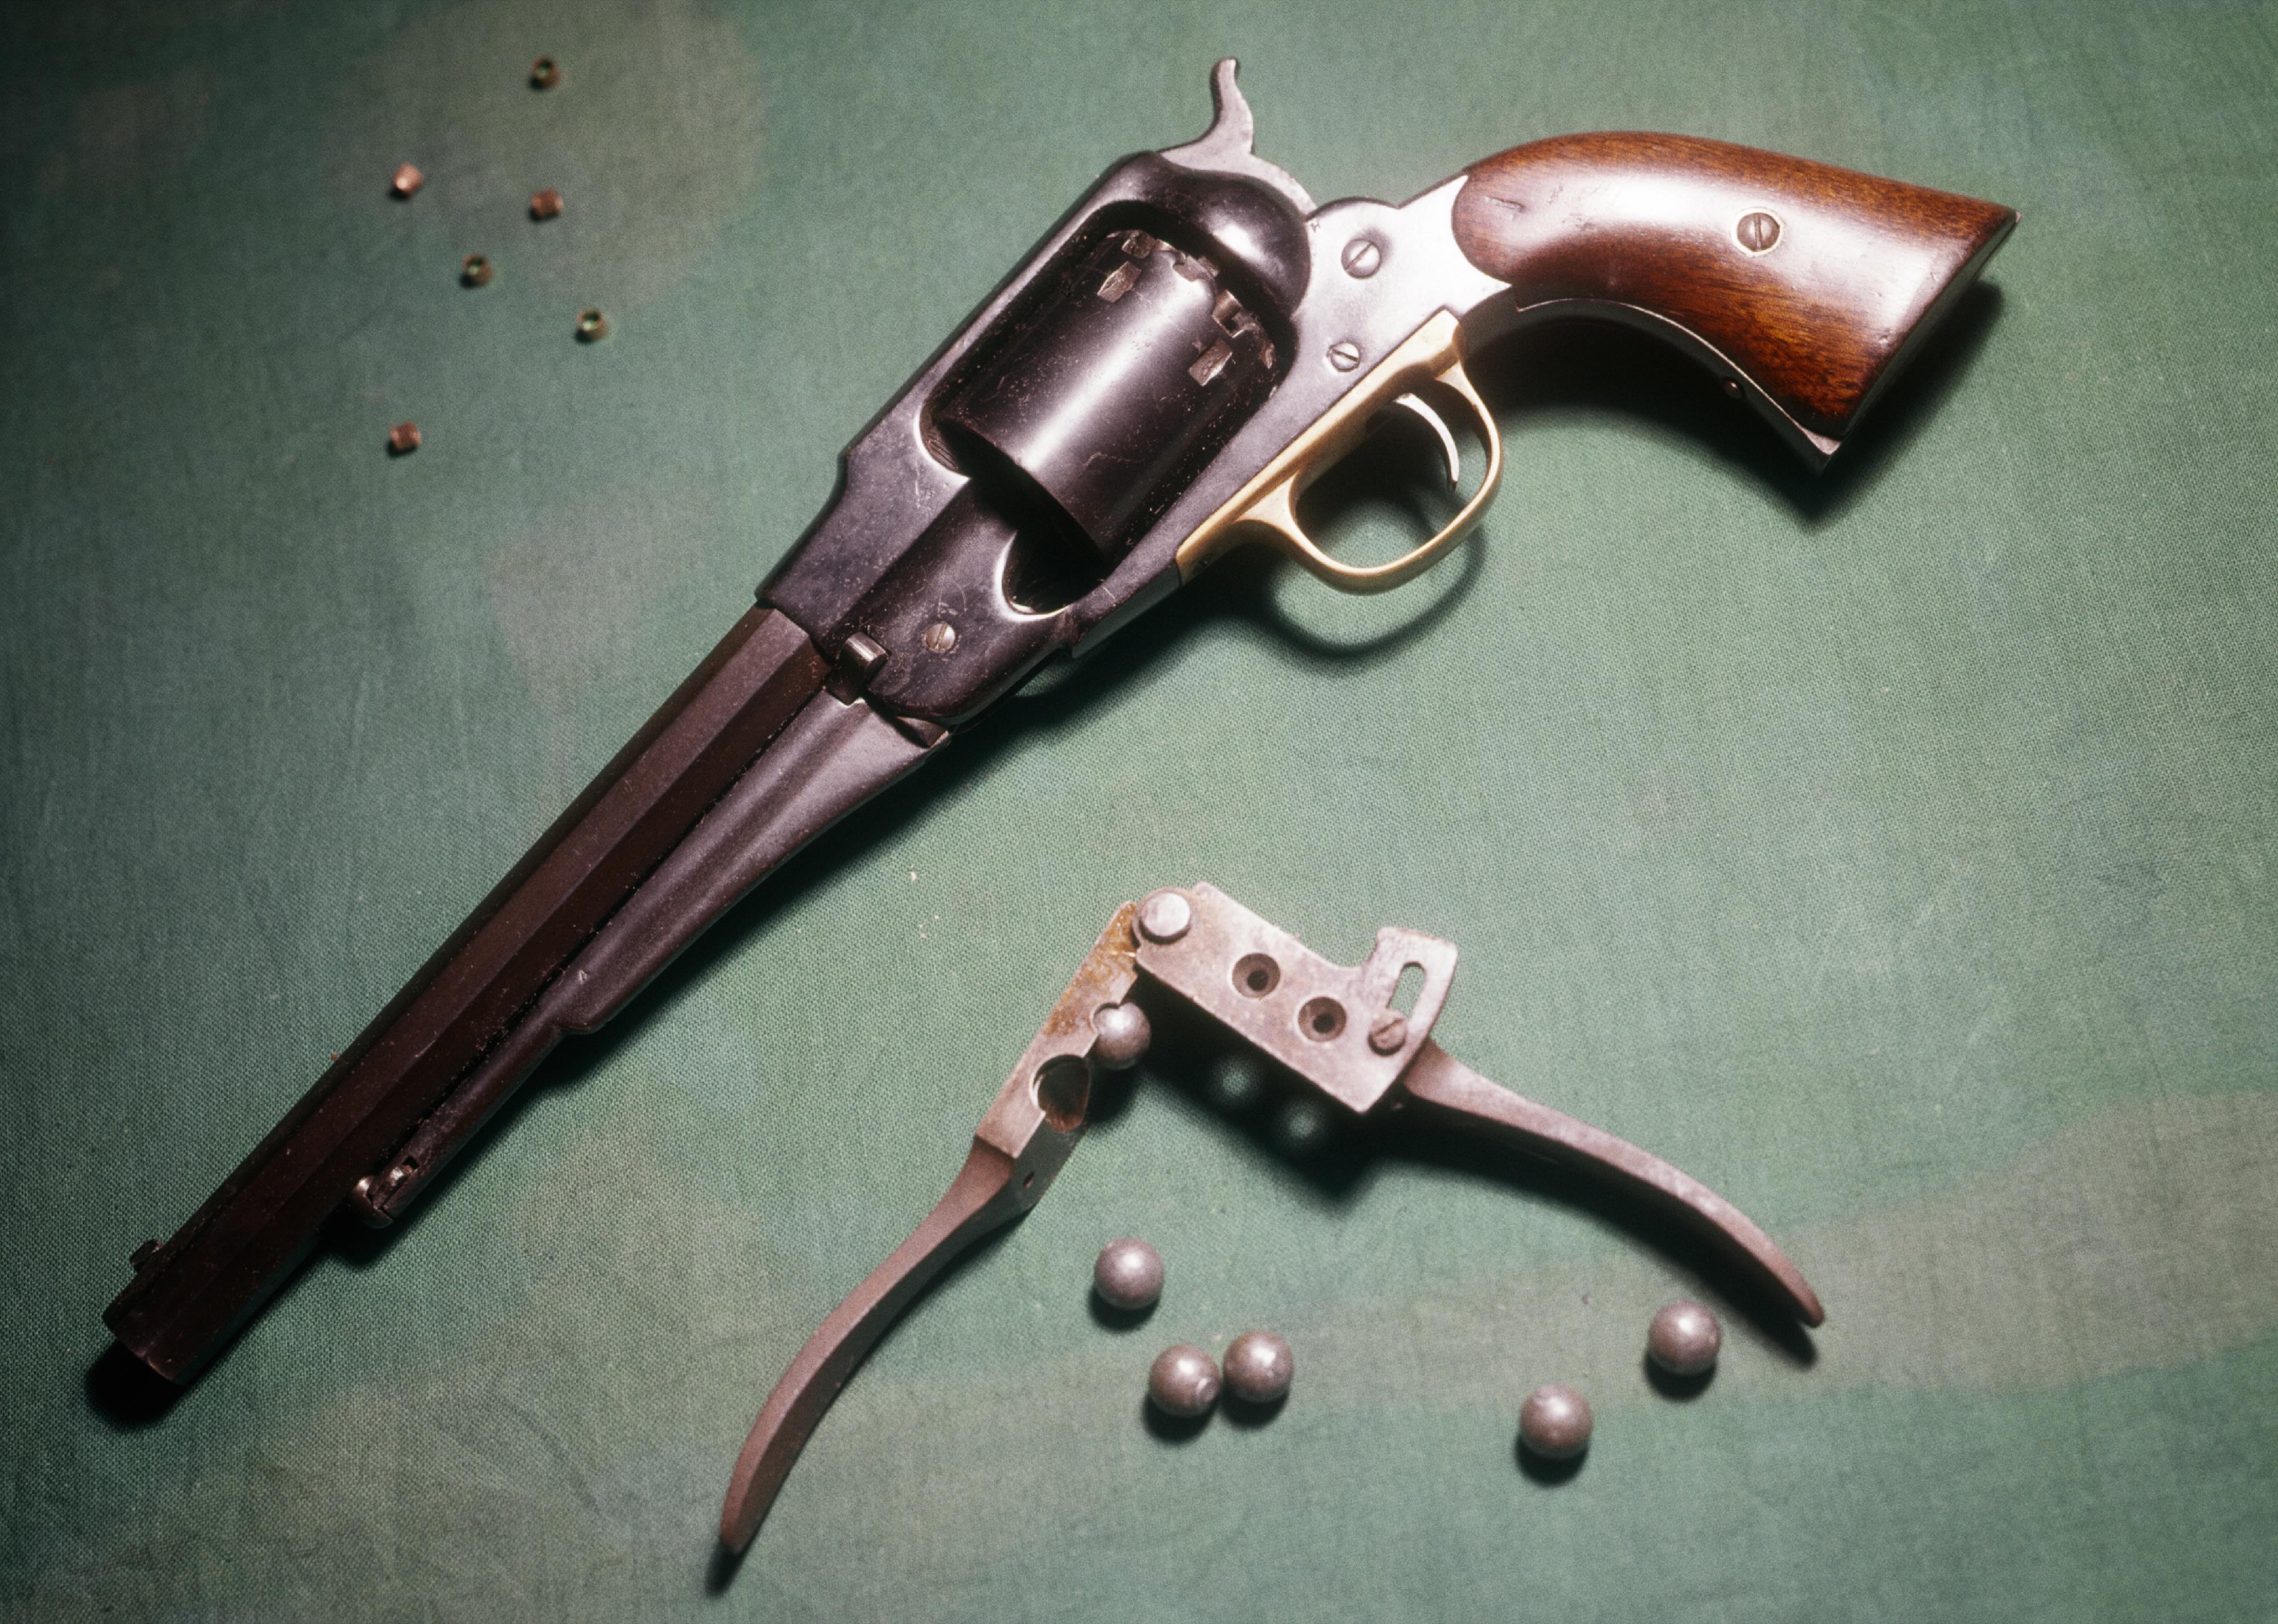 1858 Cap & Ball Percussion Revolver with lead bullets caps and mold.